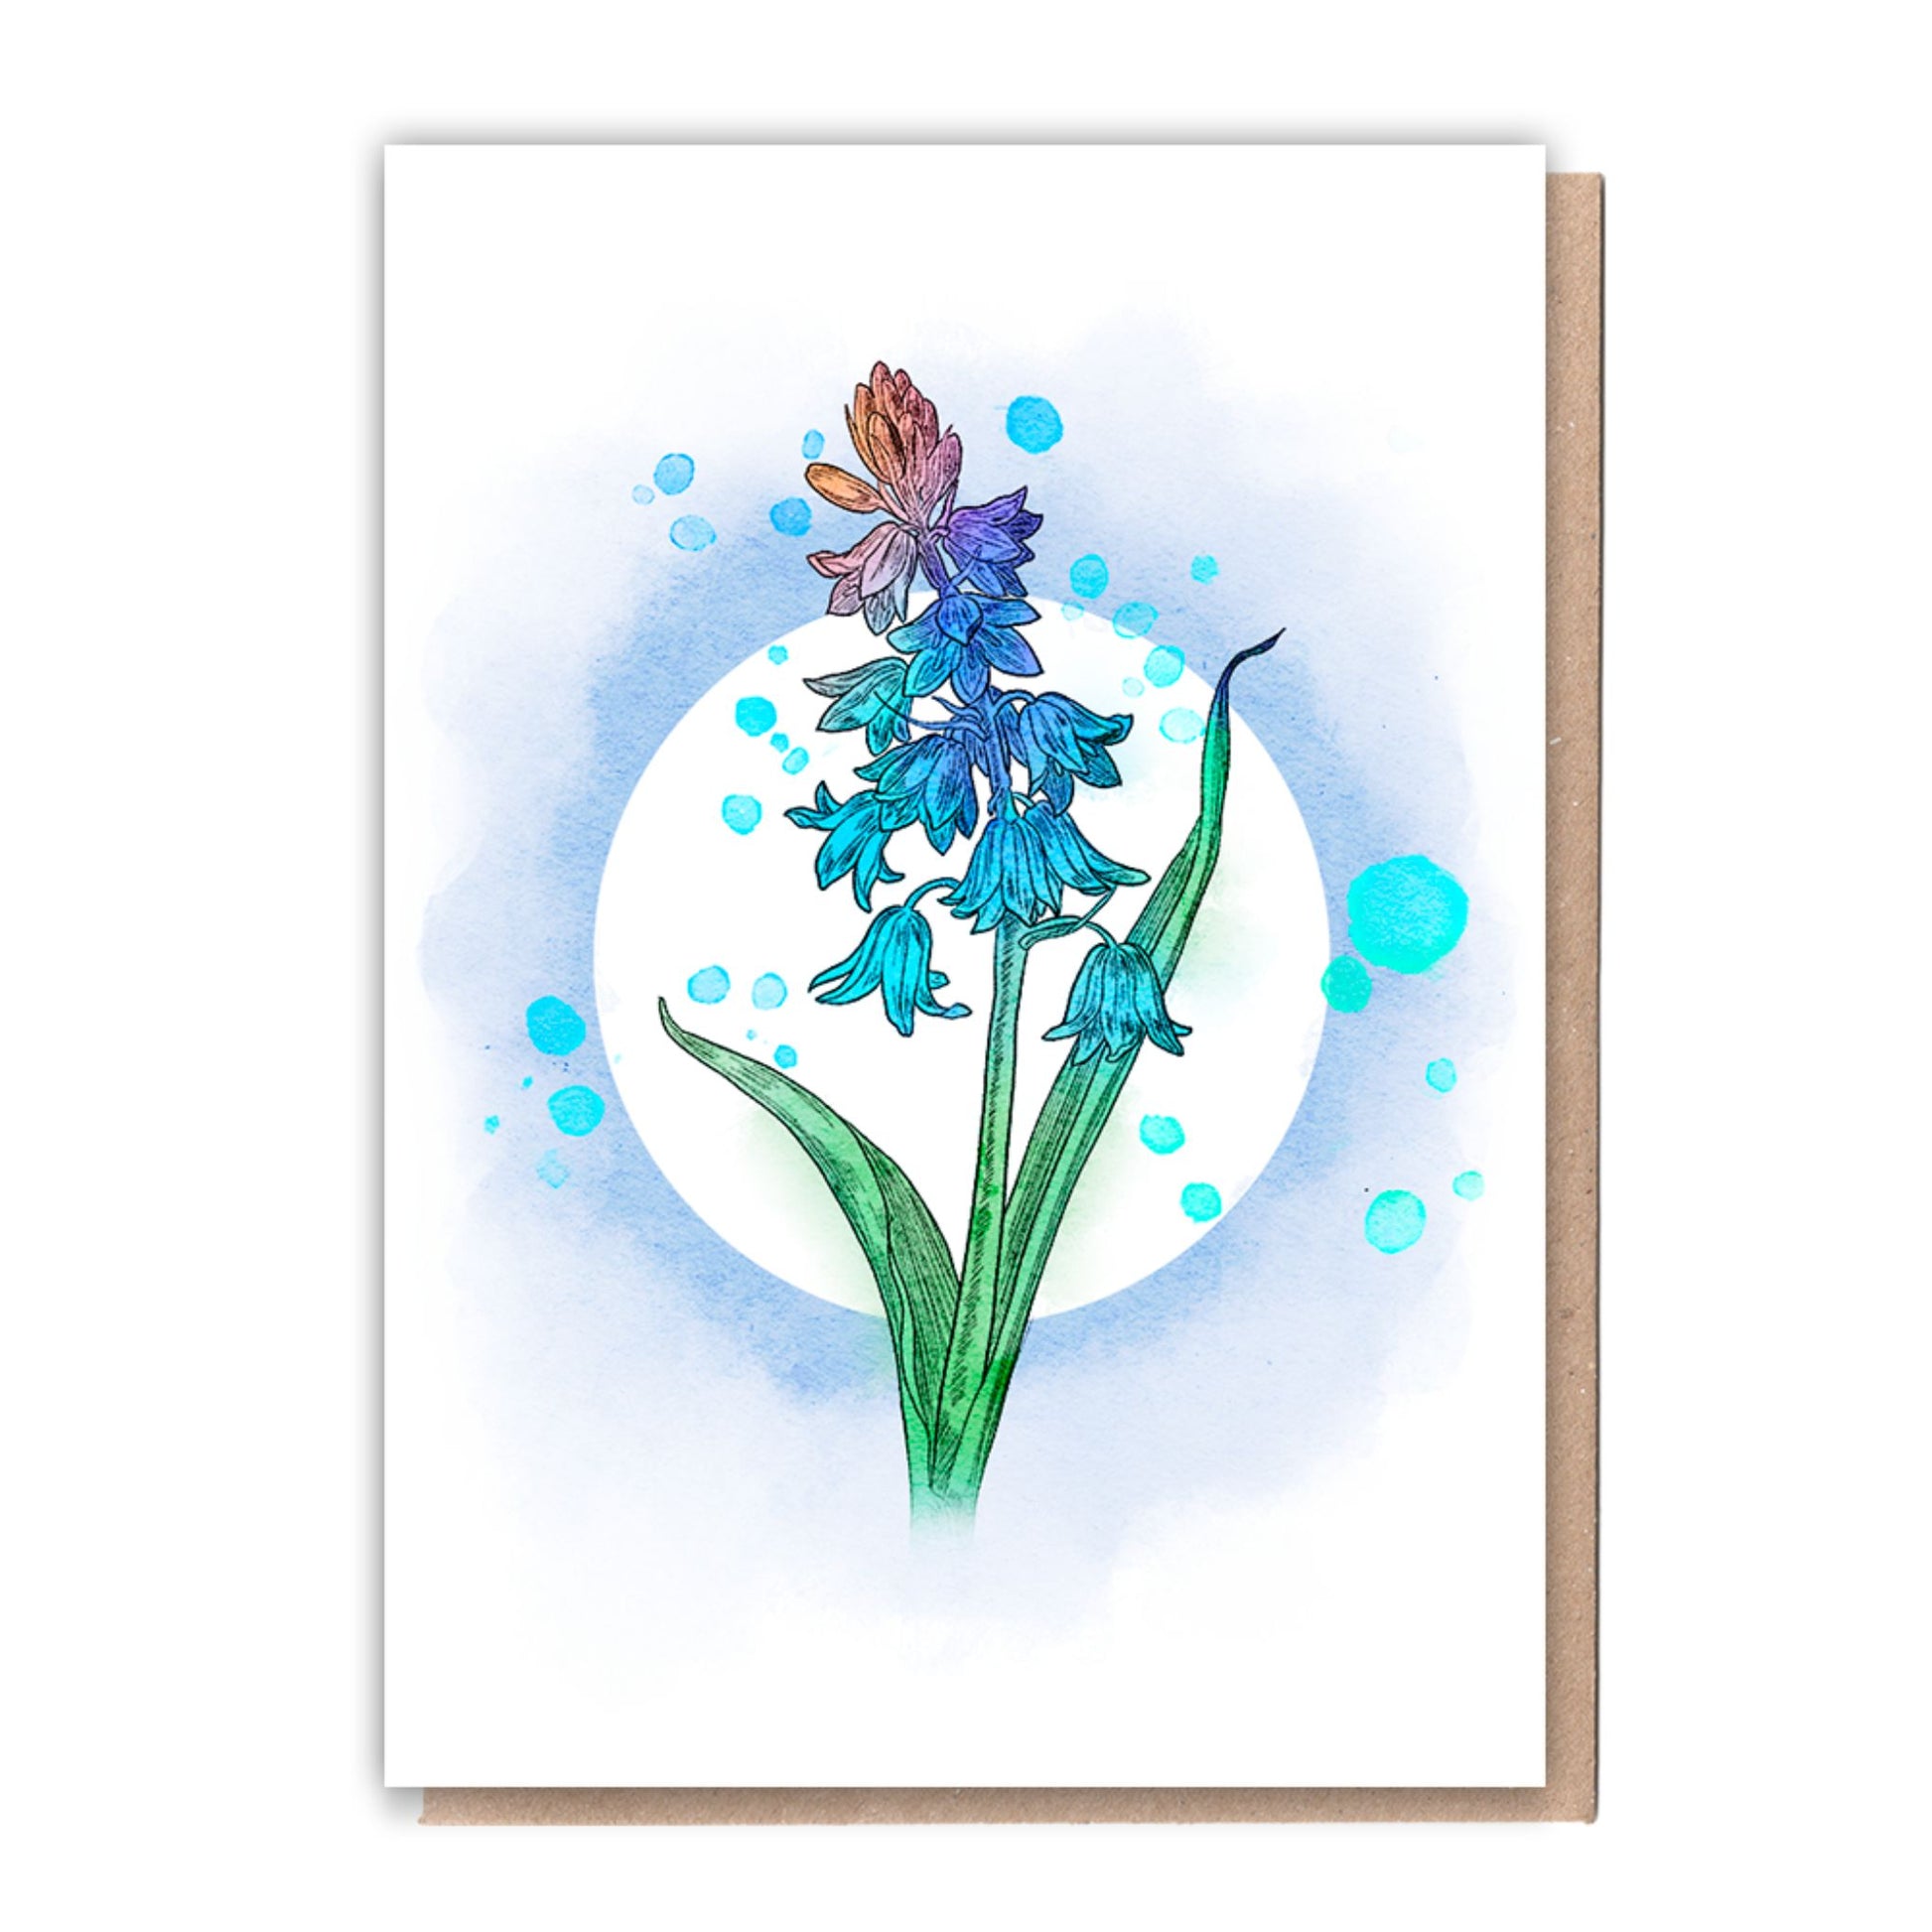 Recycled Greetings Card Box  5 Cards + 10 Trees Planted  Nature Lover - bluebells